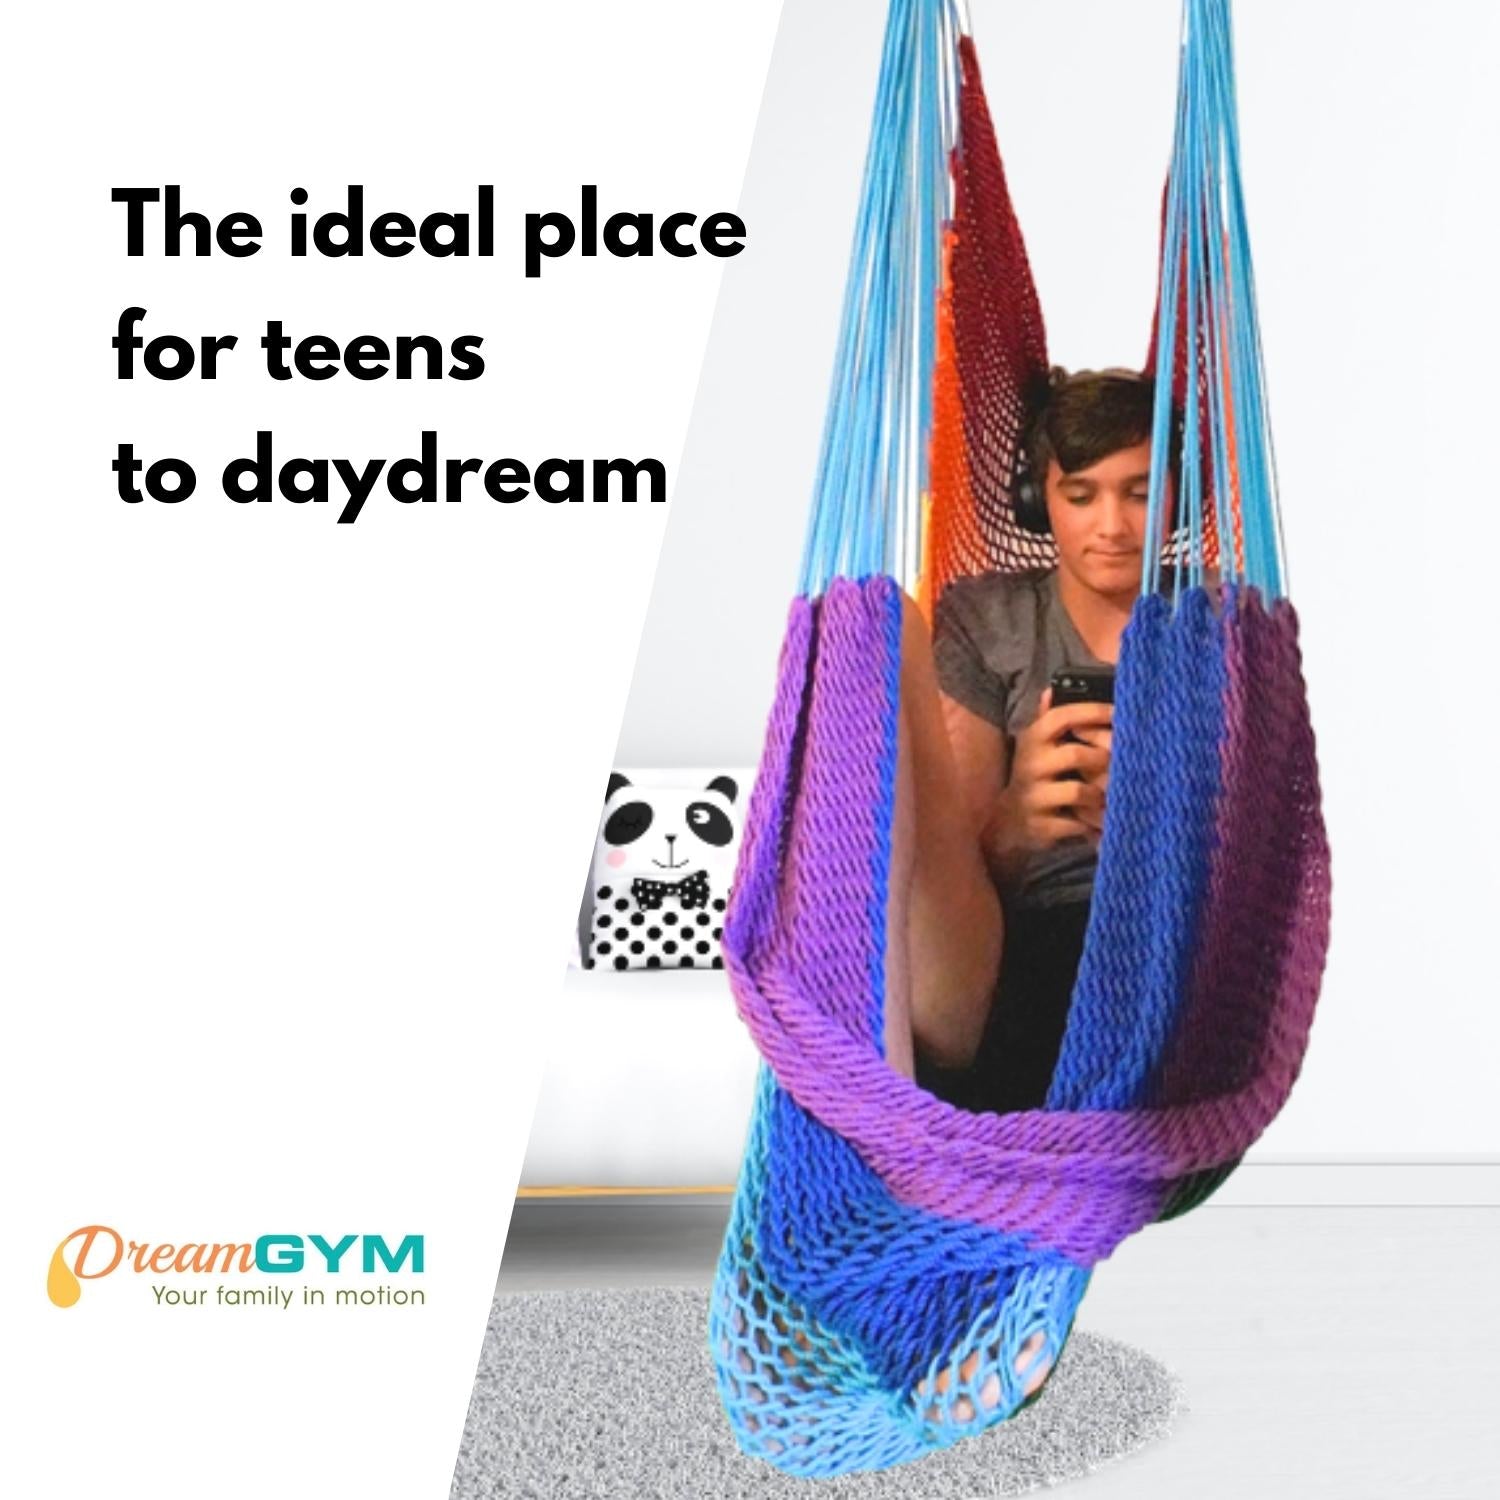 A teen boy is looking at his phone while relaxing in a hammock swing. Hammock swing is an ideal place for teens to daydream.